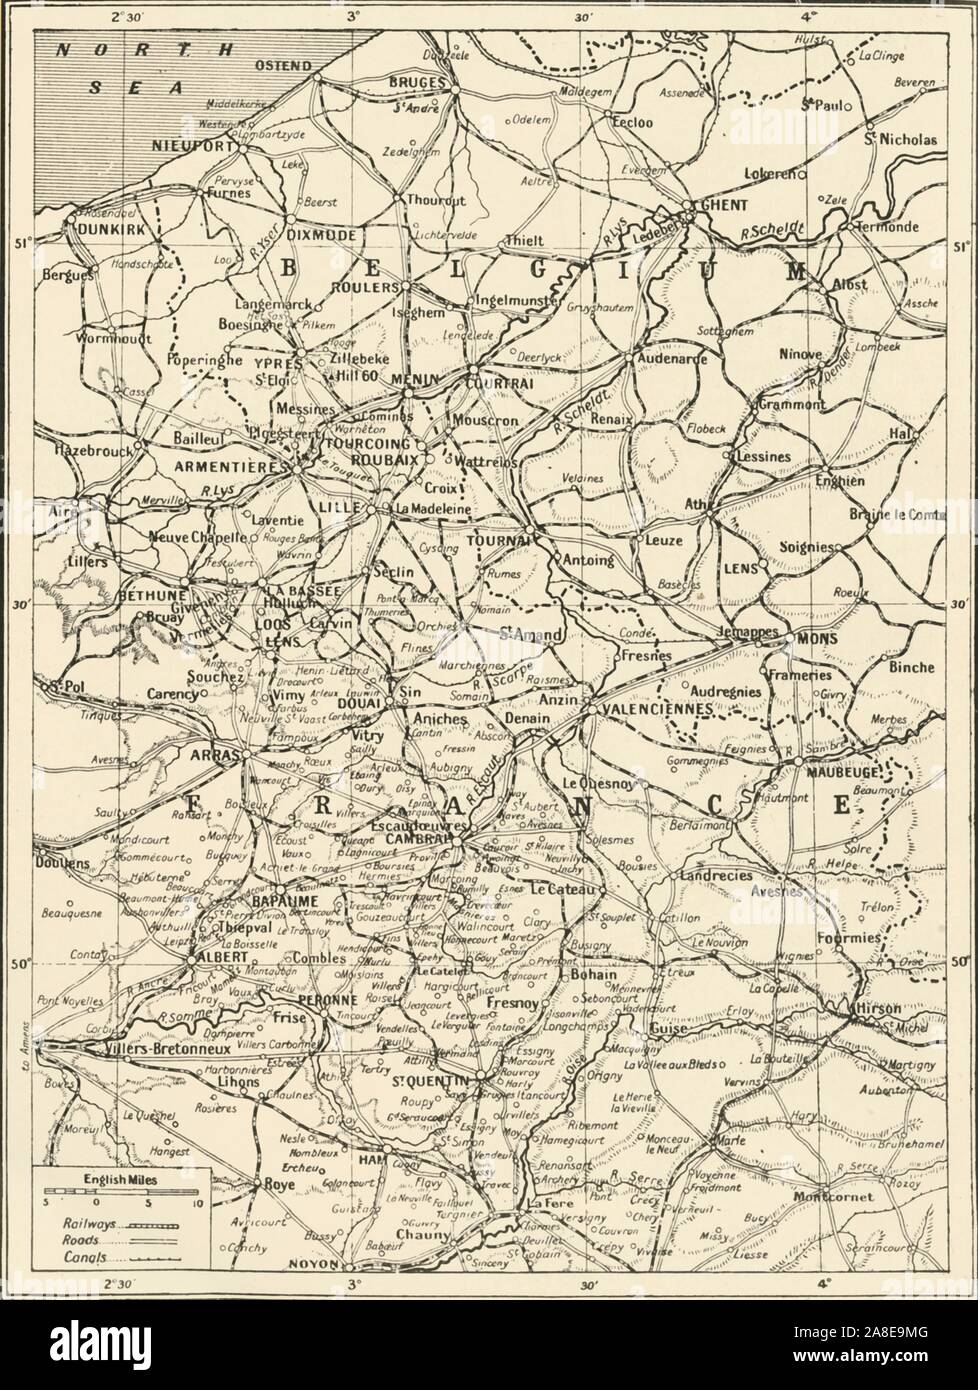 'The Great Arras Battle Area', 1917. From &quot;The War Illustrated Album De Luxe - Volume VIII. Ending The First Three Years&quot;, edited by J. A. Hammerton. [The Amalgamated Press, Limited, London, 1917] Stock Photo